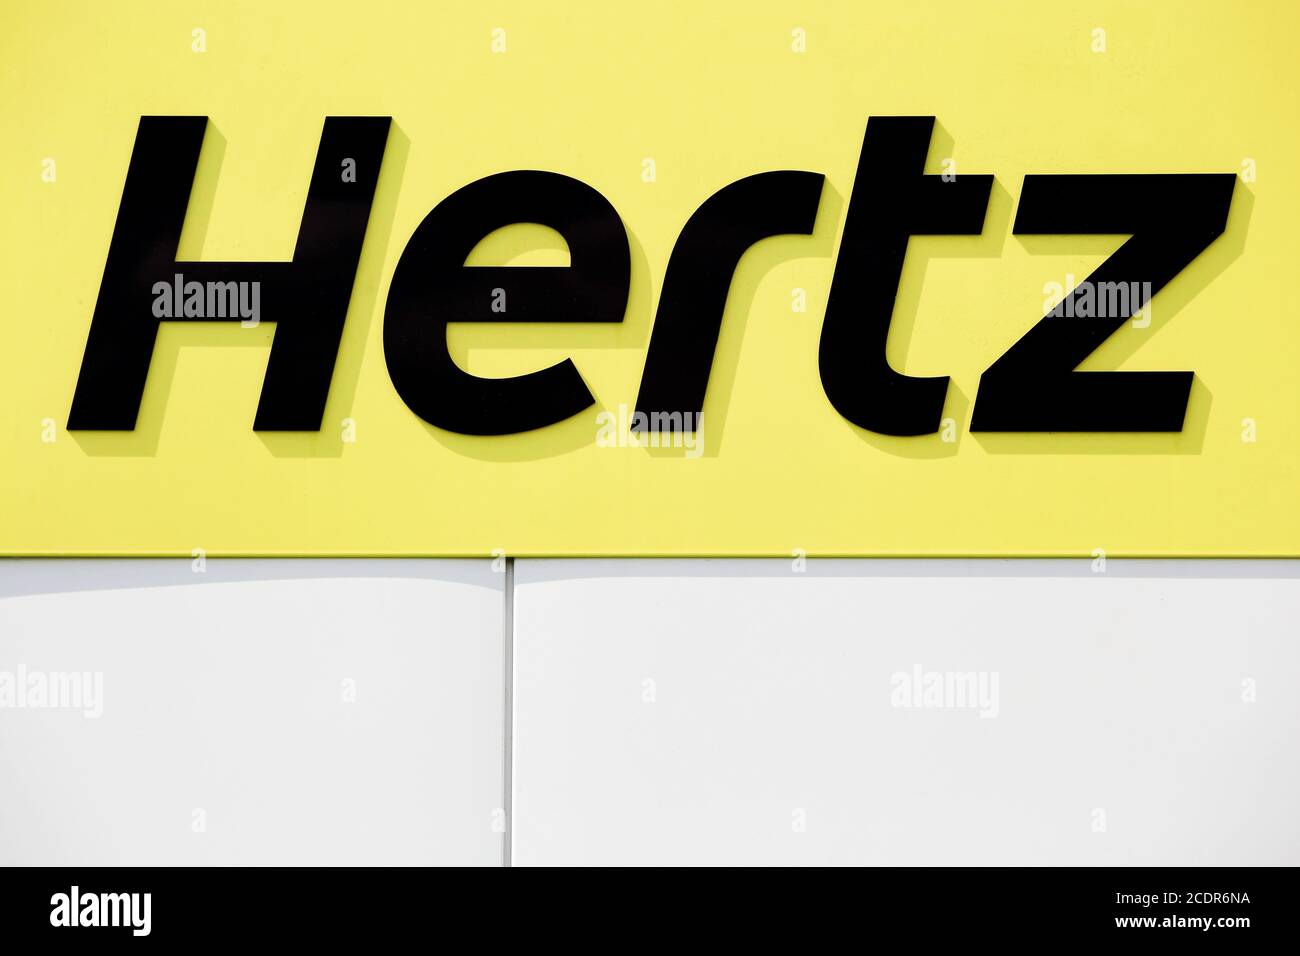 Villefranche sur Saone, France - May 24, 2015: Hertz logo on a wall. Hertz is an American car rental company Stock Photo